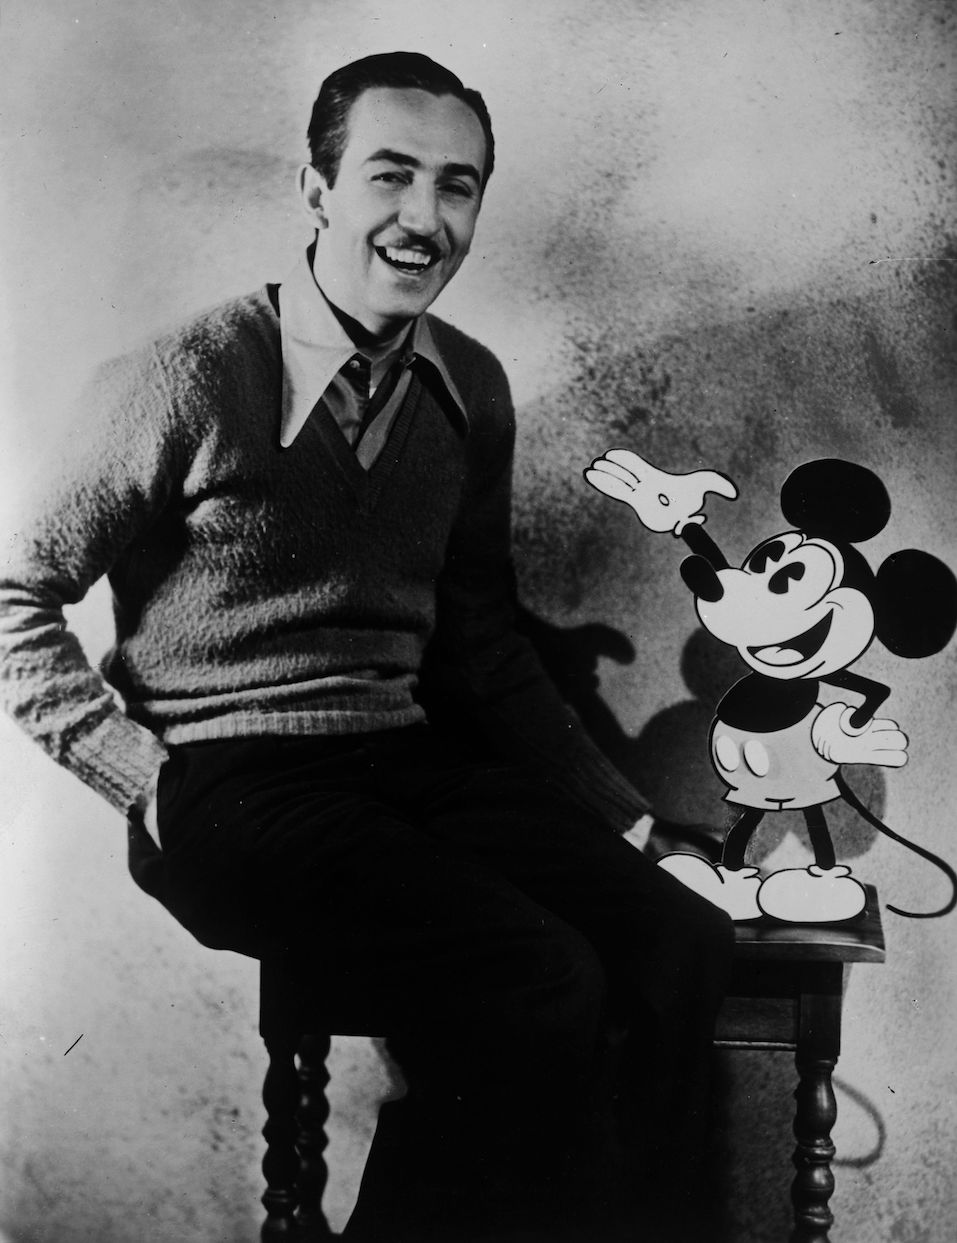 American animator and producer Walt Disney with one of his creations Mickey Mouse